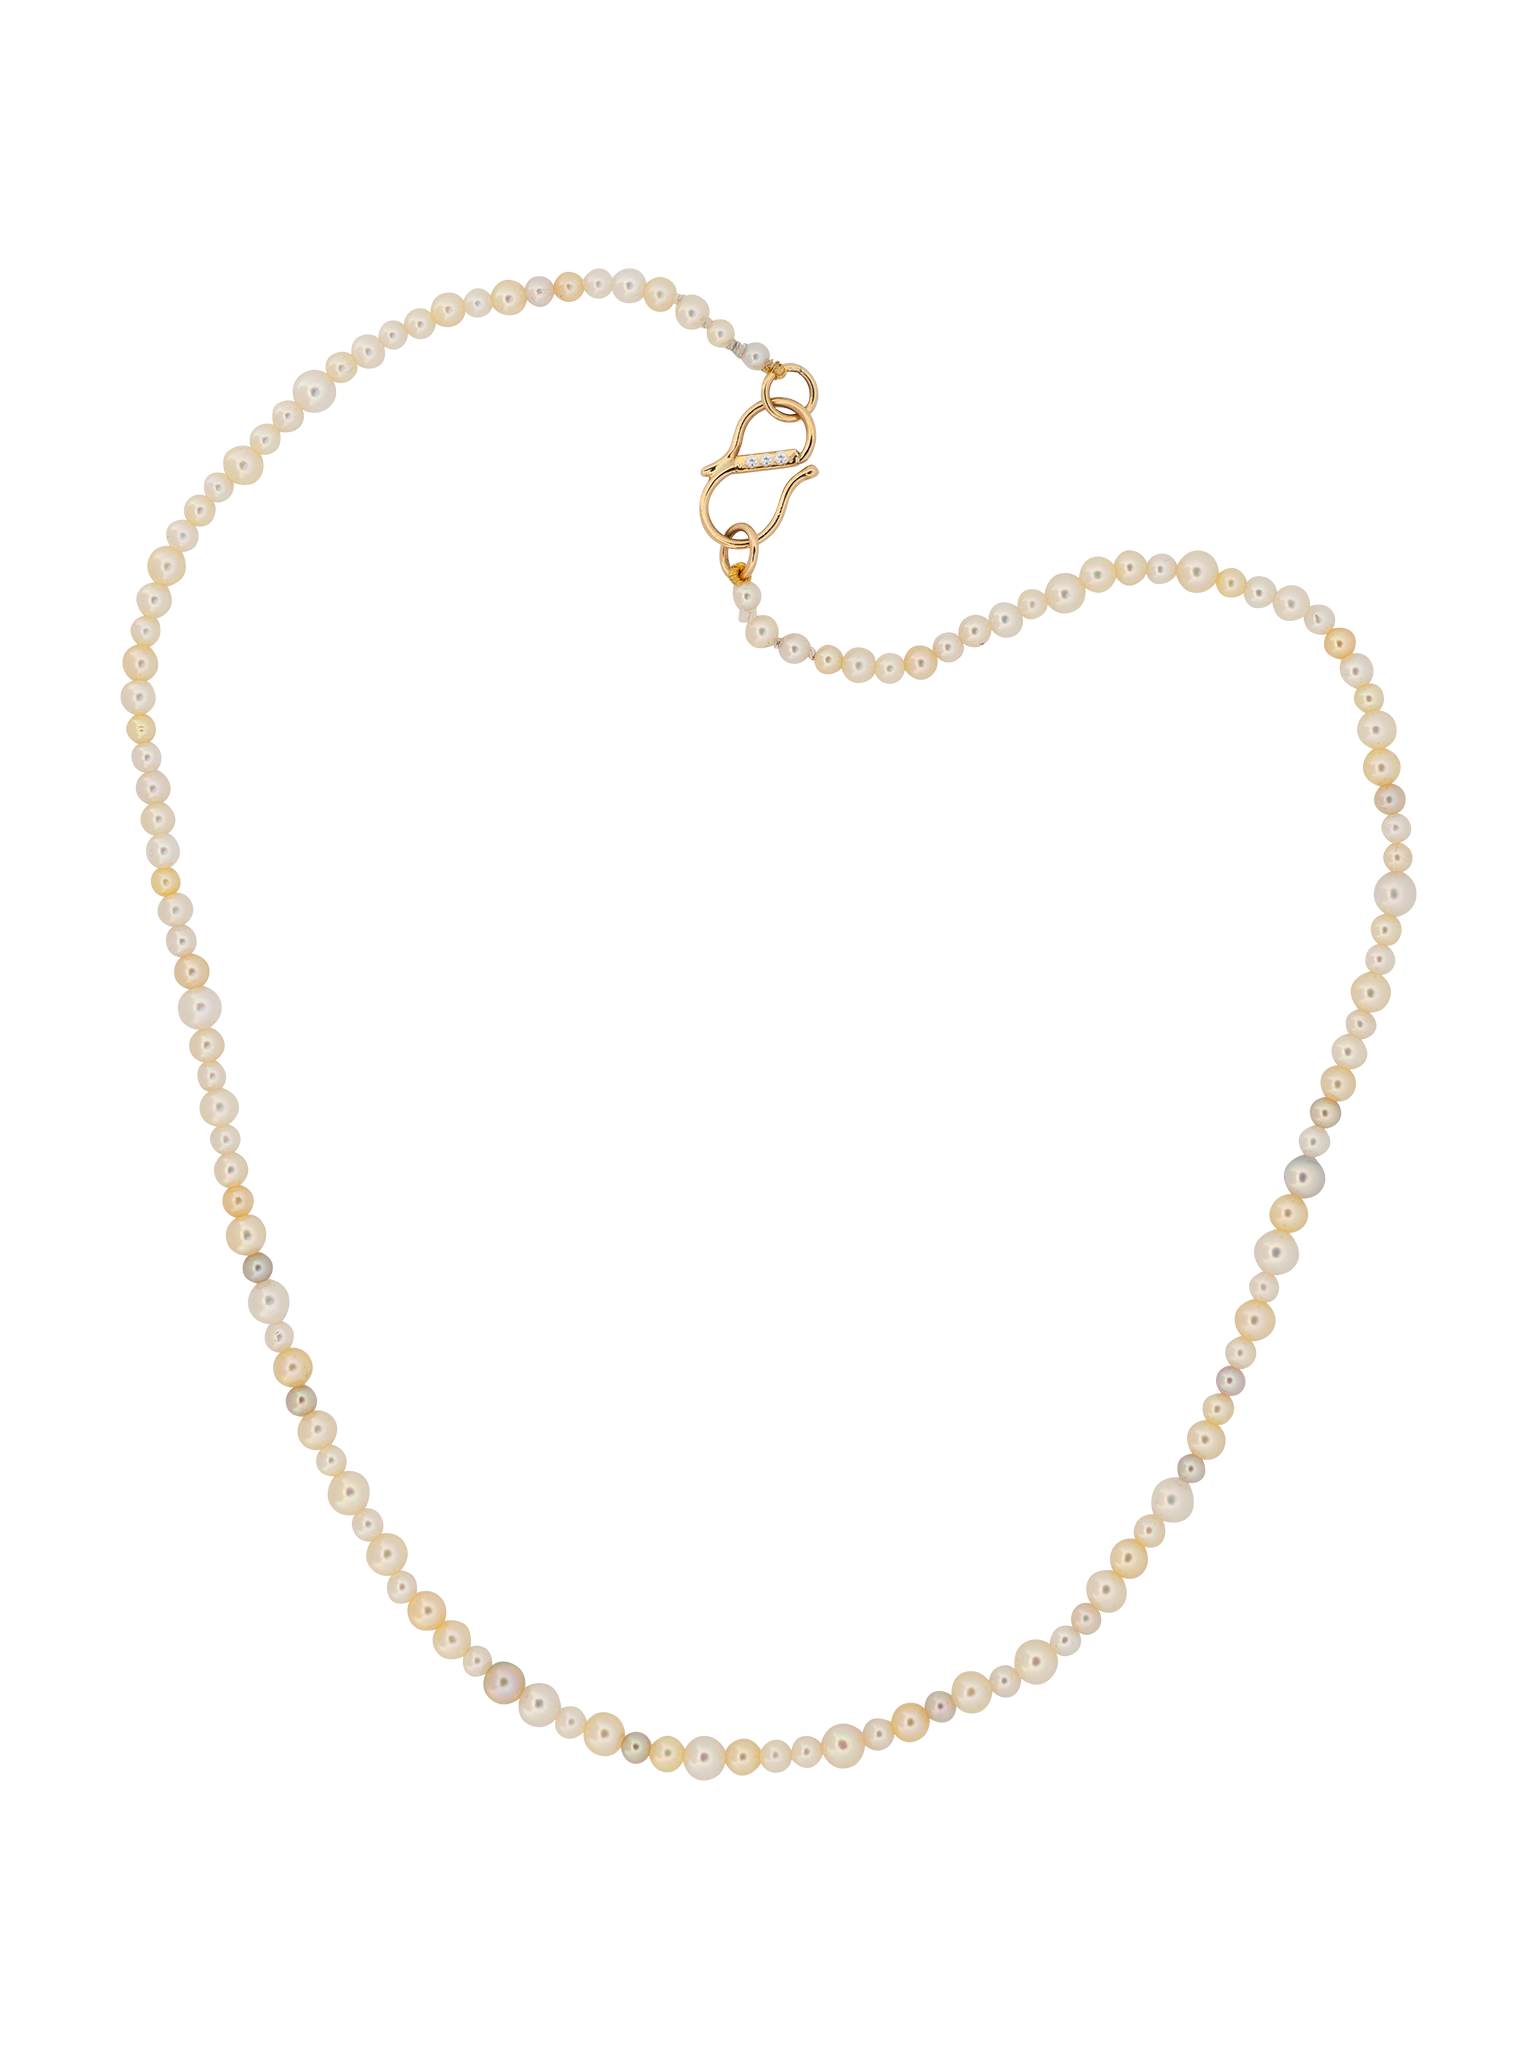 Akoya pearl necklace with diamond clasp